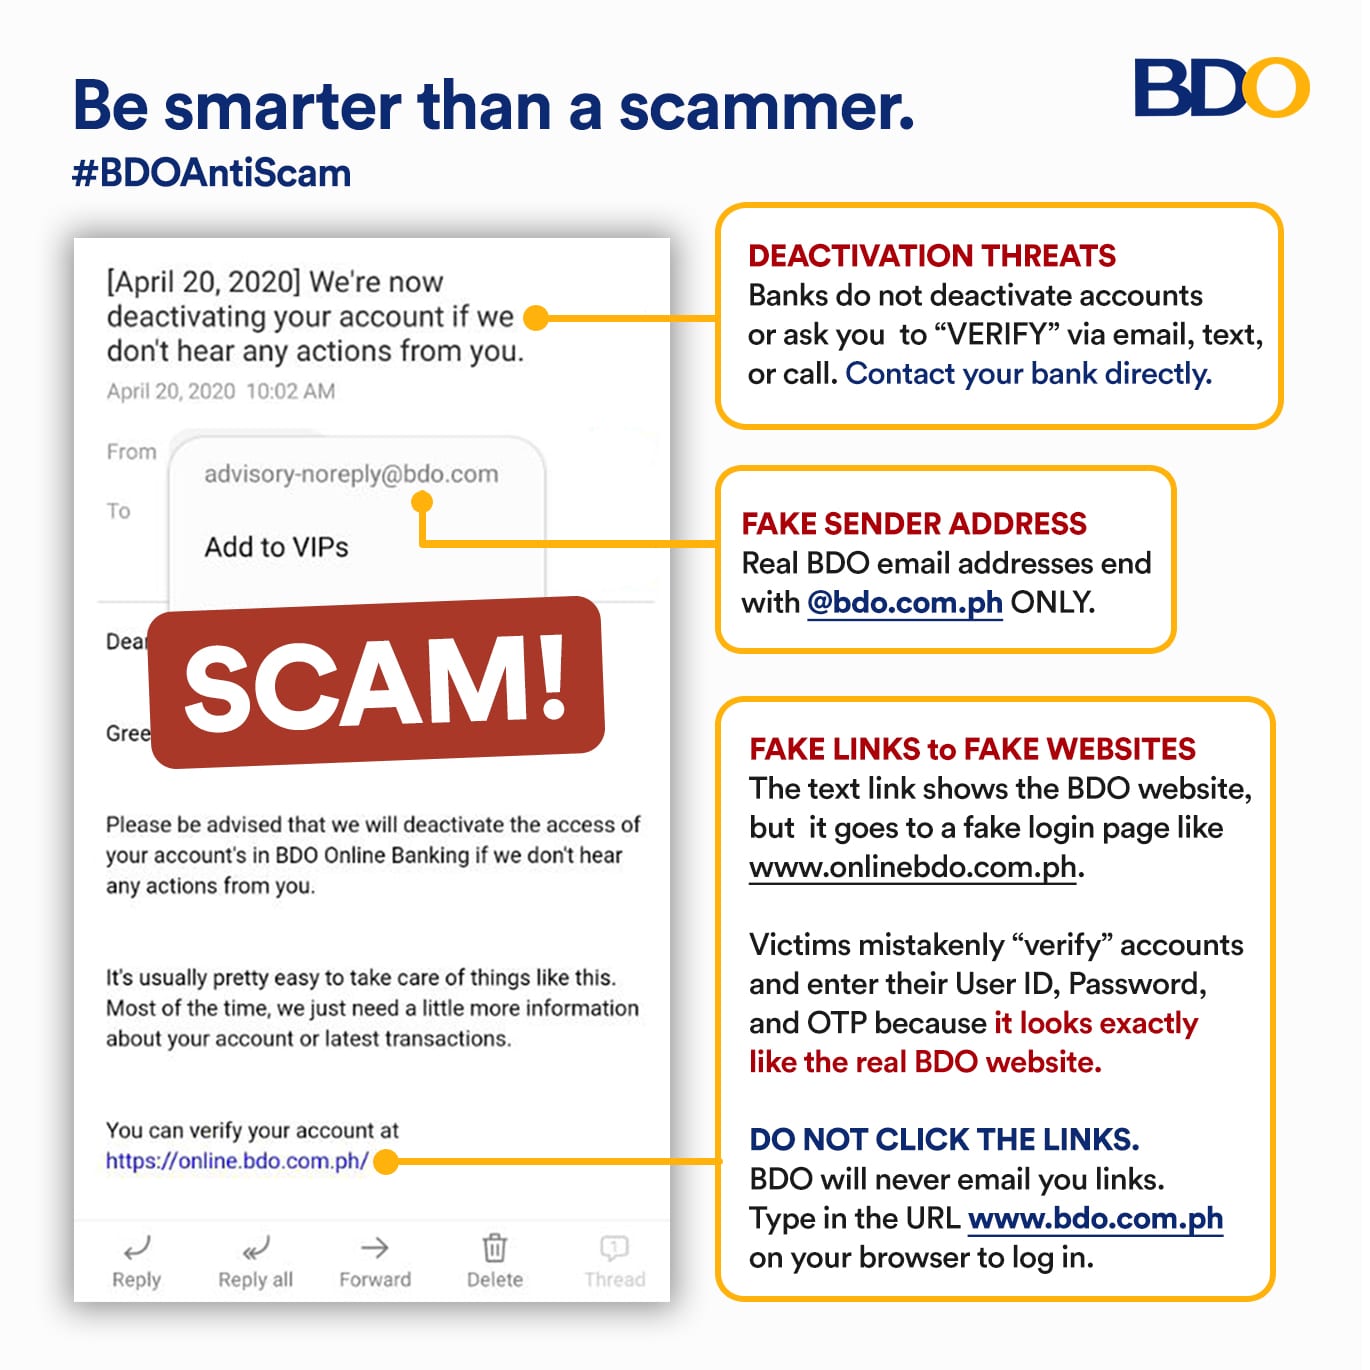 6 tips to be smarter than a scammer